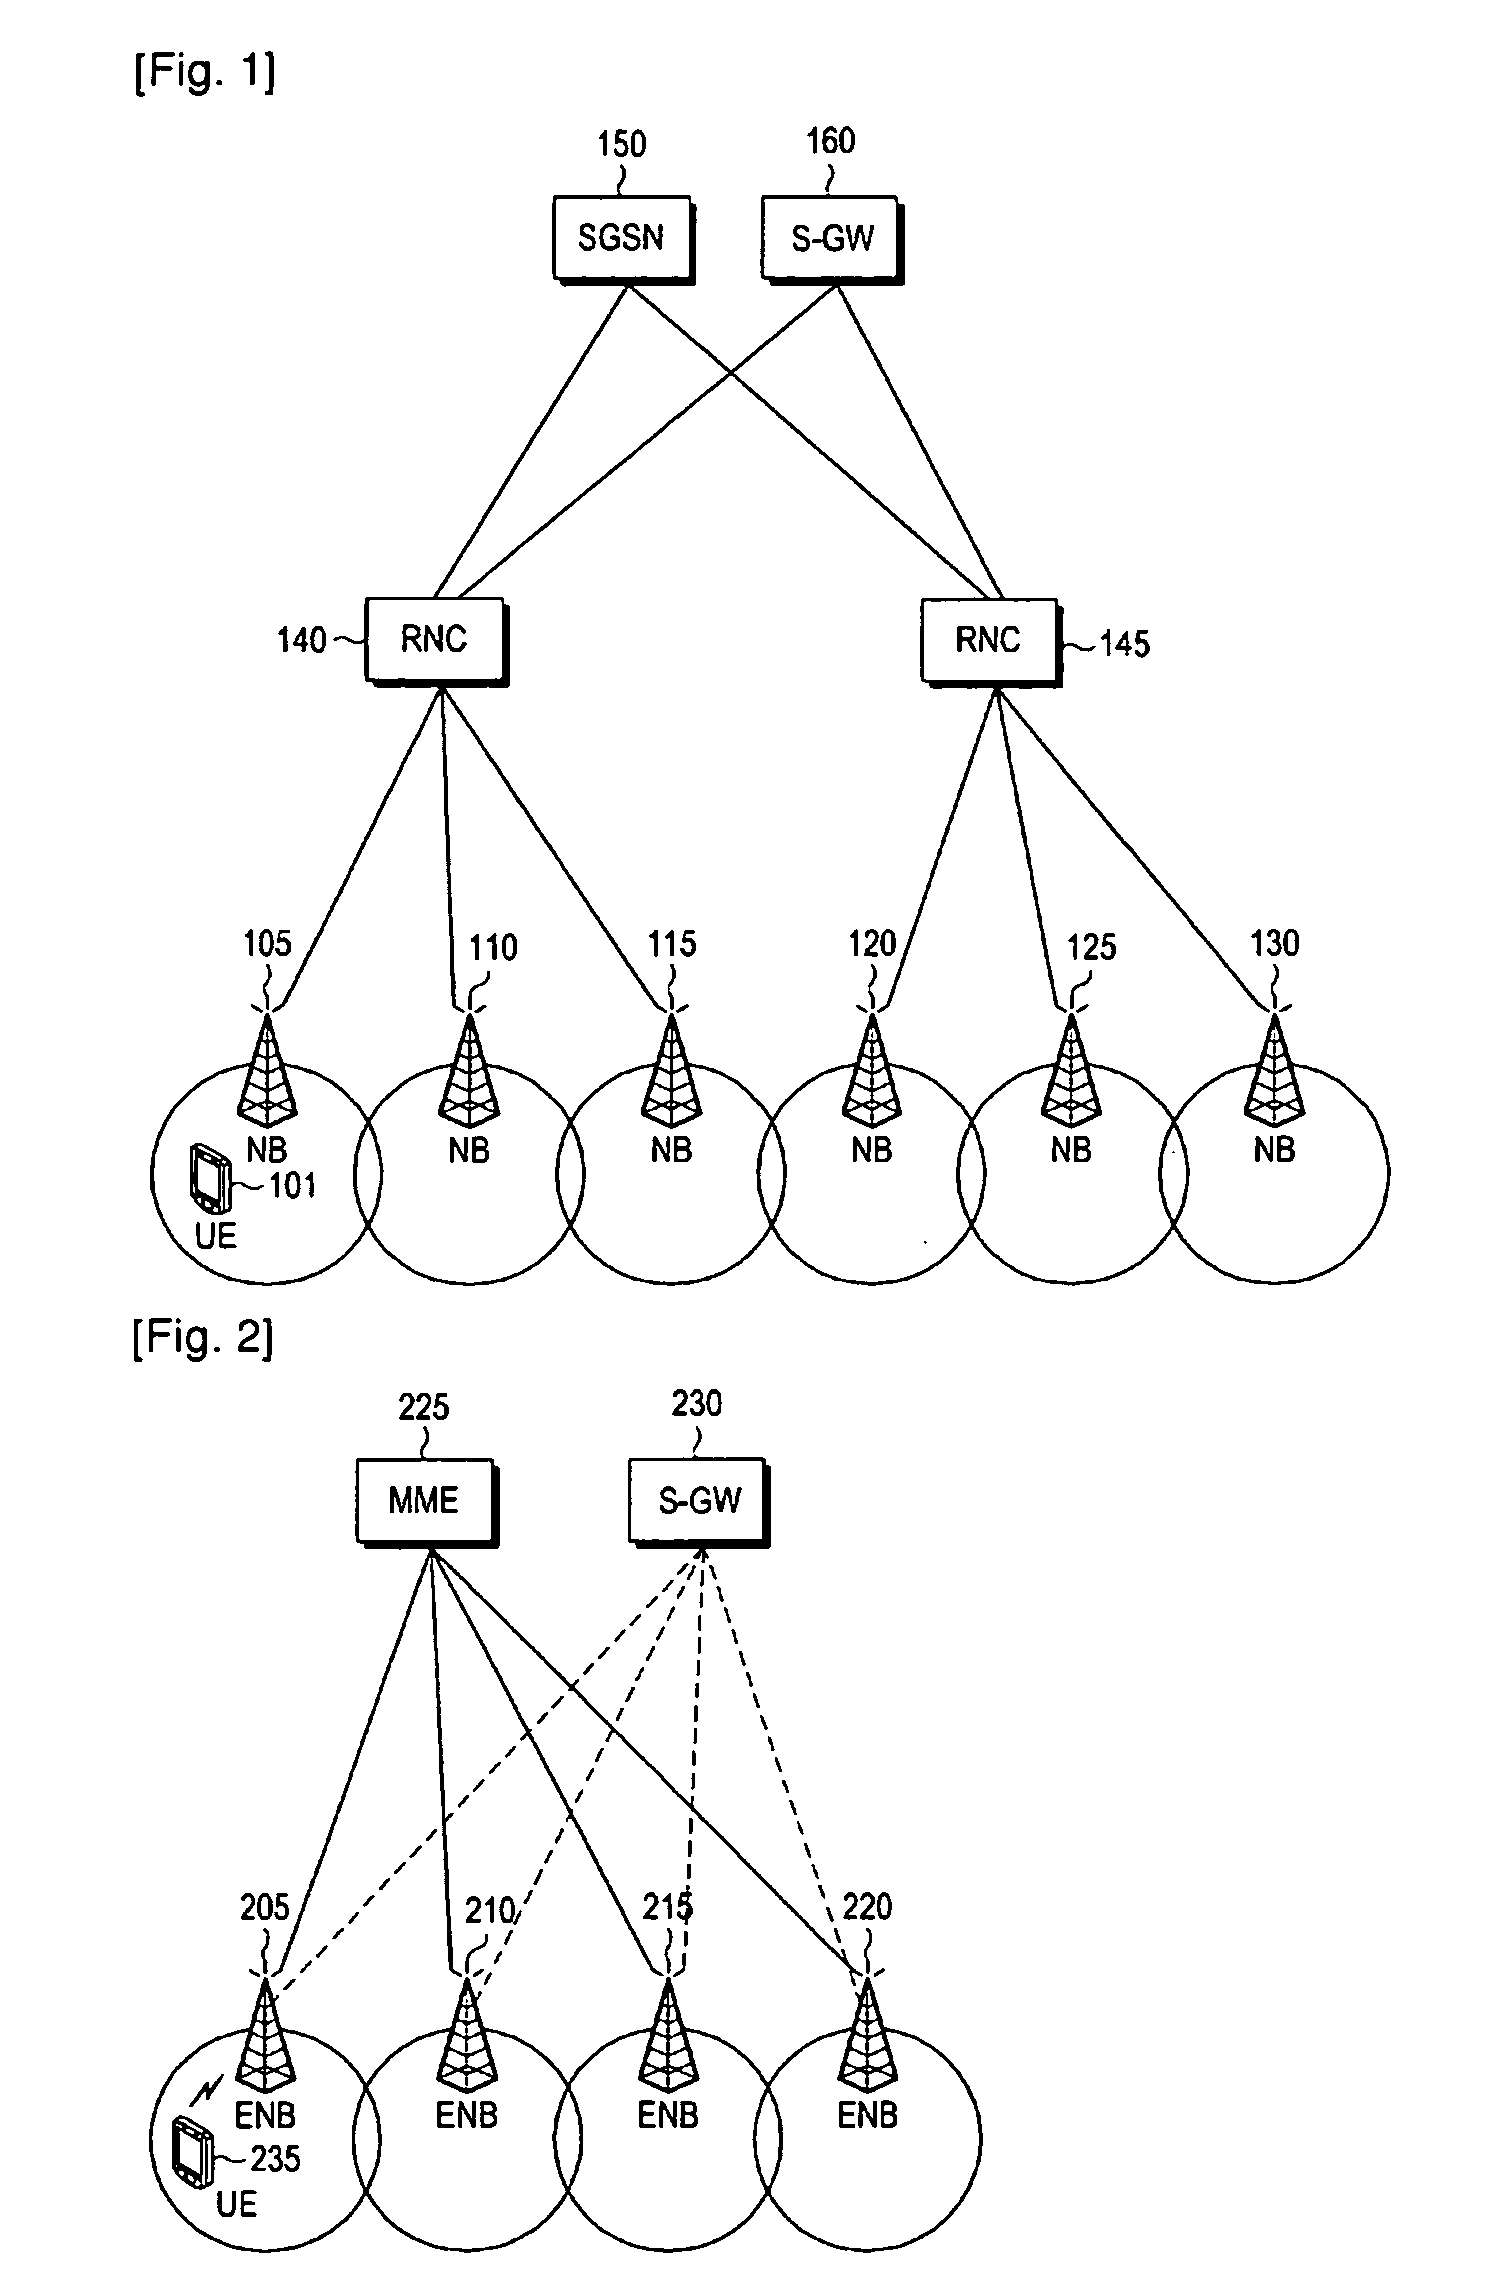 Paging method and apparatus for communication of m2m/mtc device operating in high power saving reception mode in a mobile communication system, and system thereof